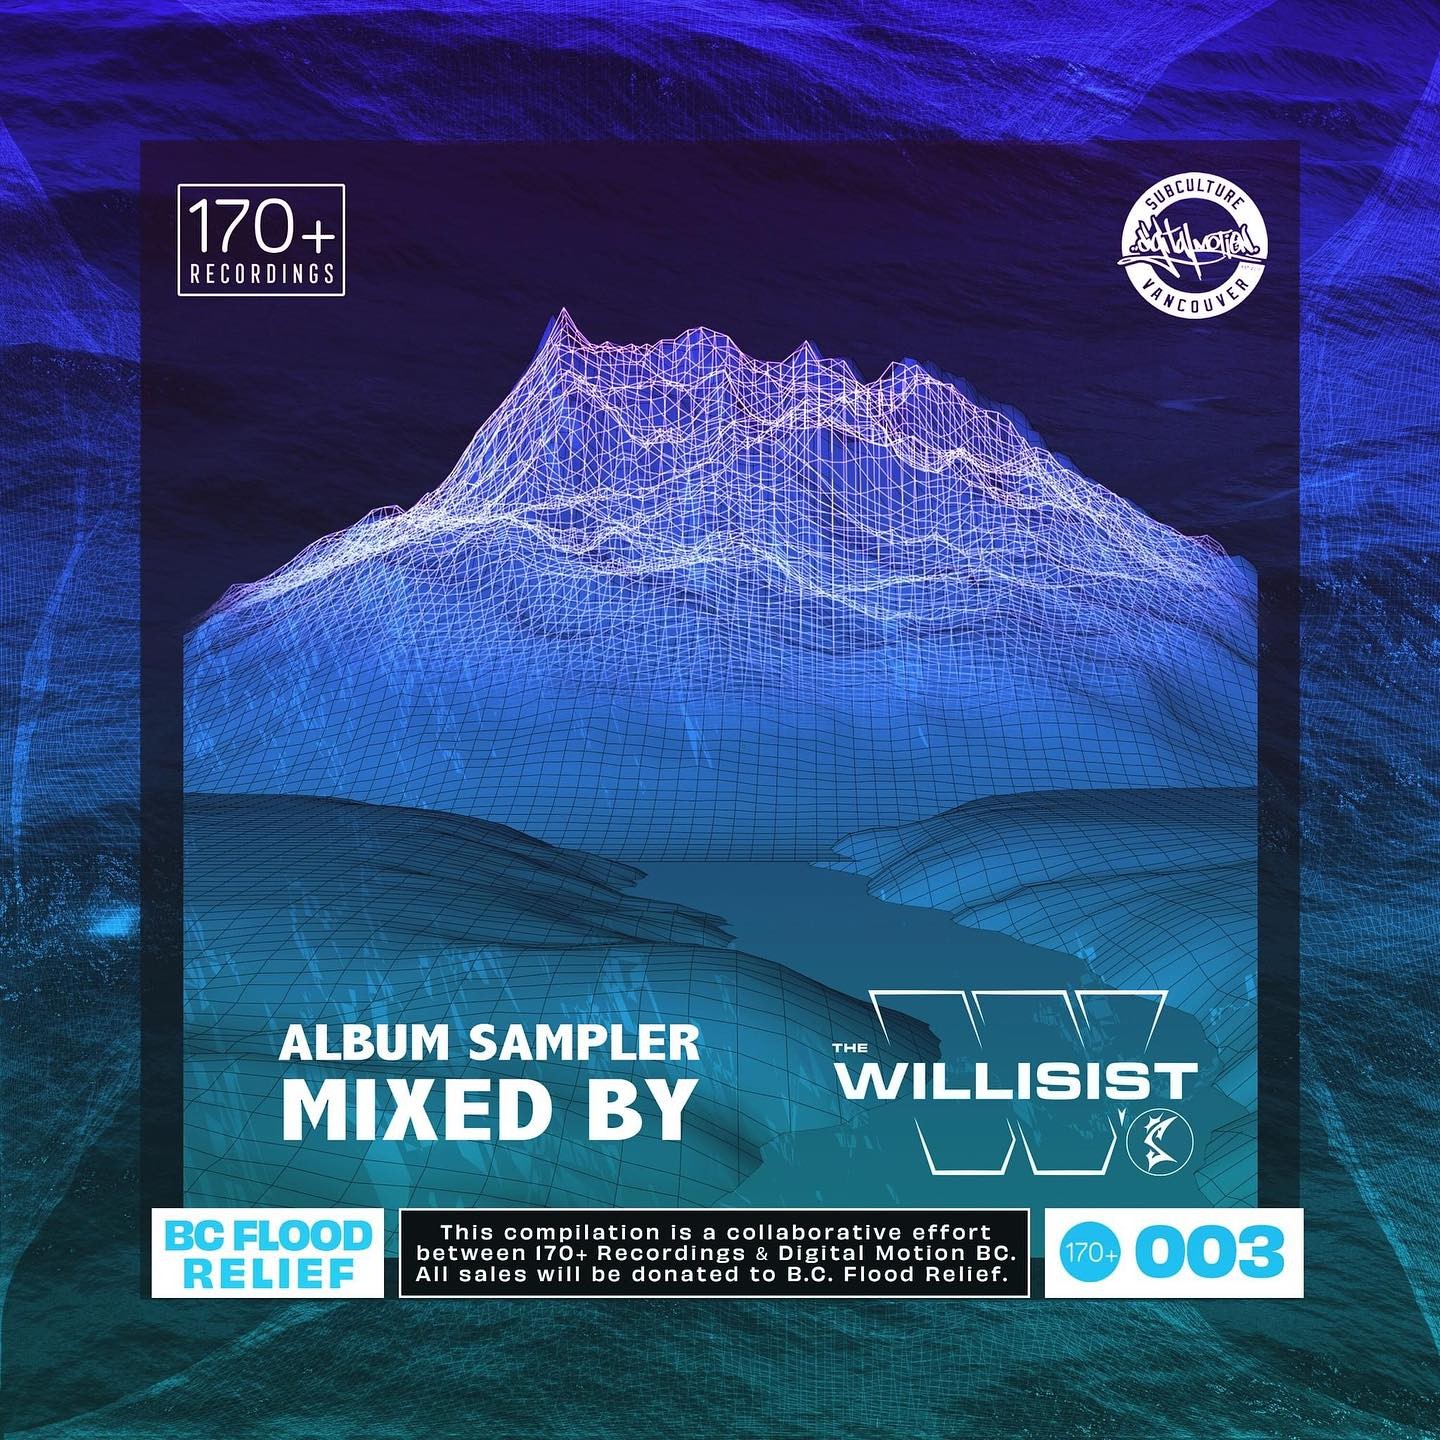 We just dropped a brand new mix on our Sound Cloud page! This mix showcases all of the tunes from our latest release with @170plusrecordings . We want to thank @the.willisist @shahdjs for putting them together for this exclusive album sampler! Check out of story over the next 24 hours for the direct link or visit our SoundCloud page to hear it and cop a free download. 🔊🎶🔥💯🇨🇦🌎💧